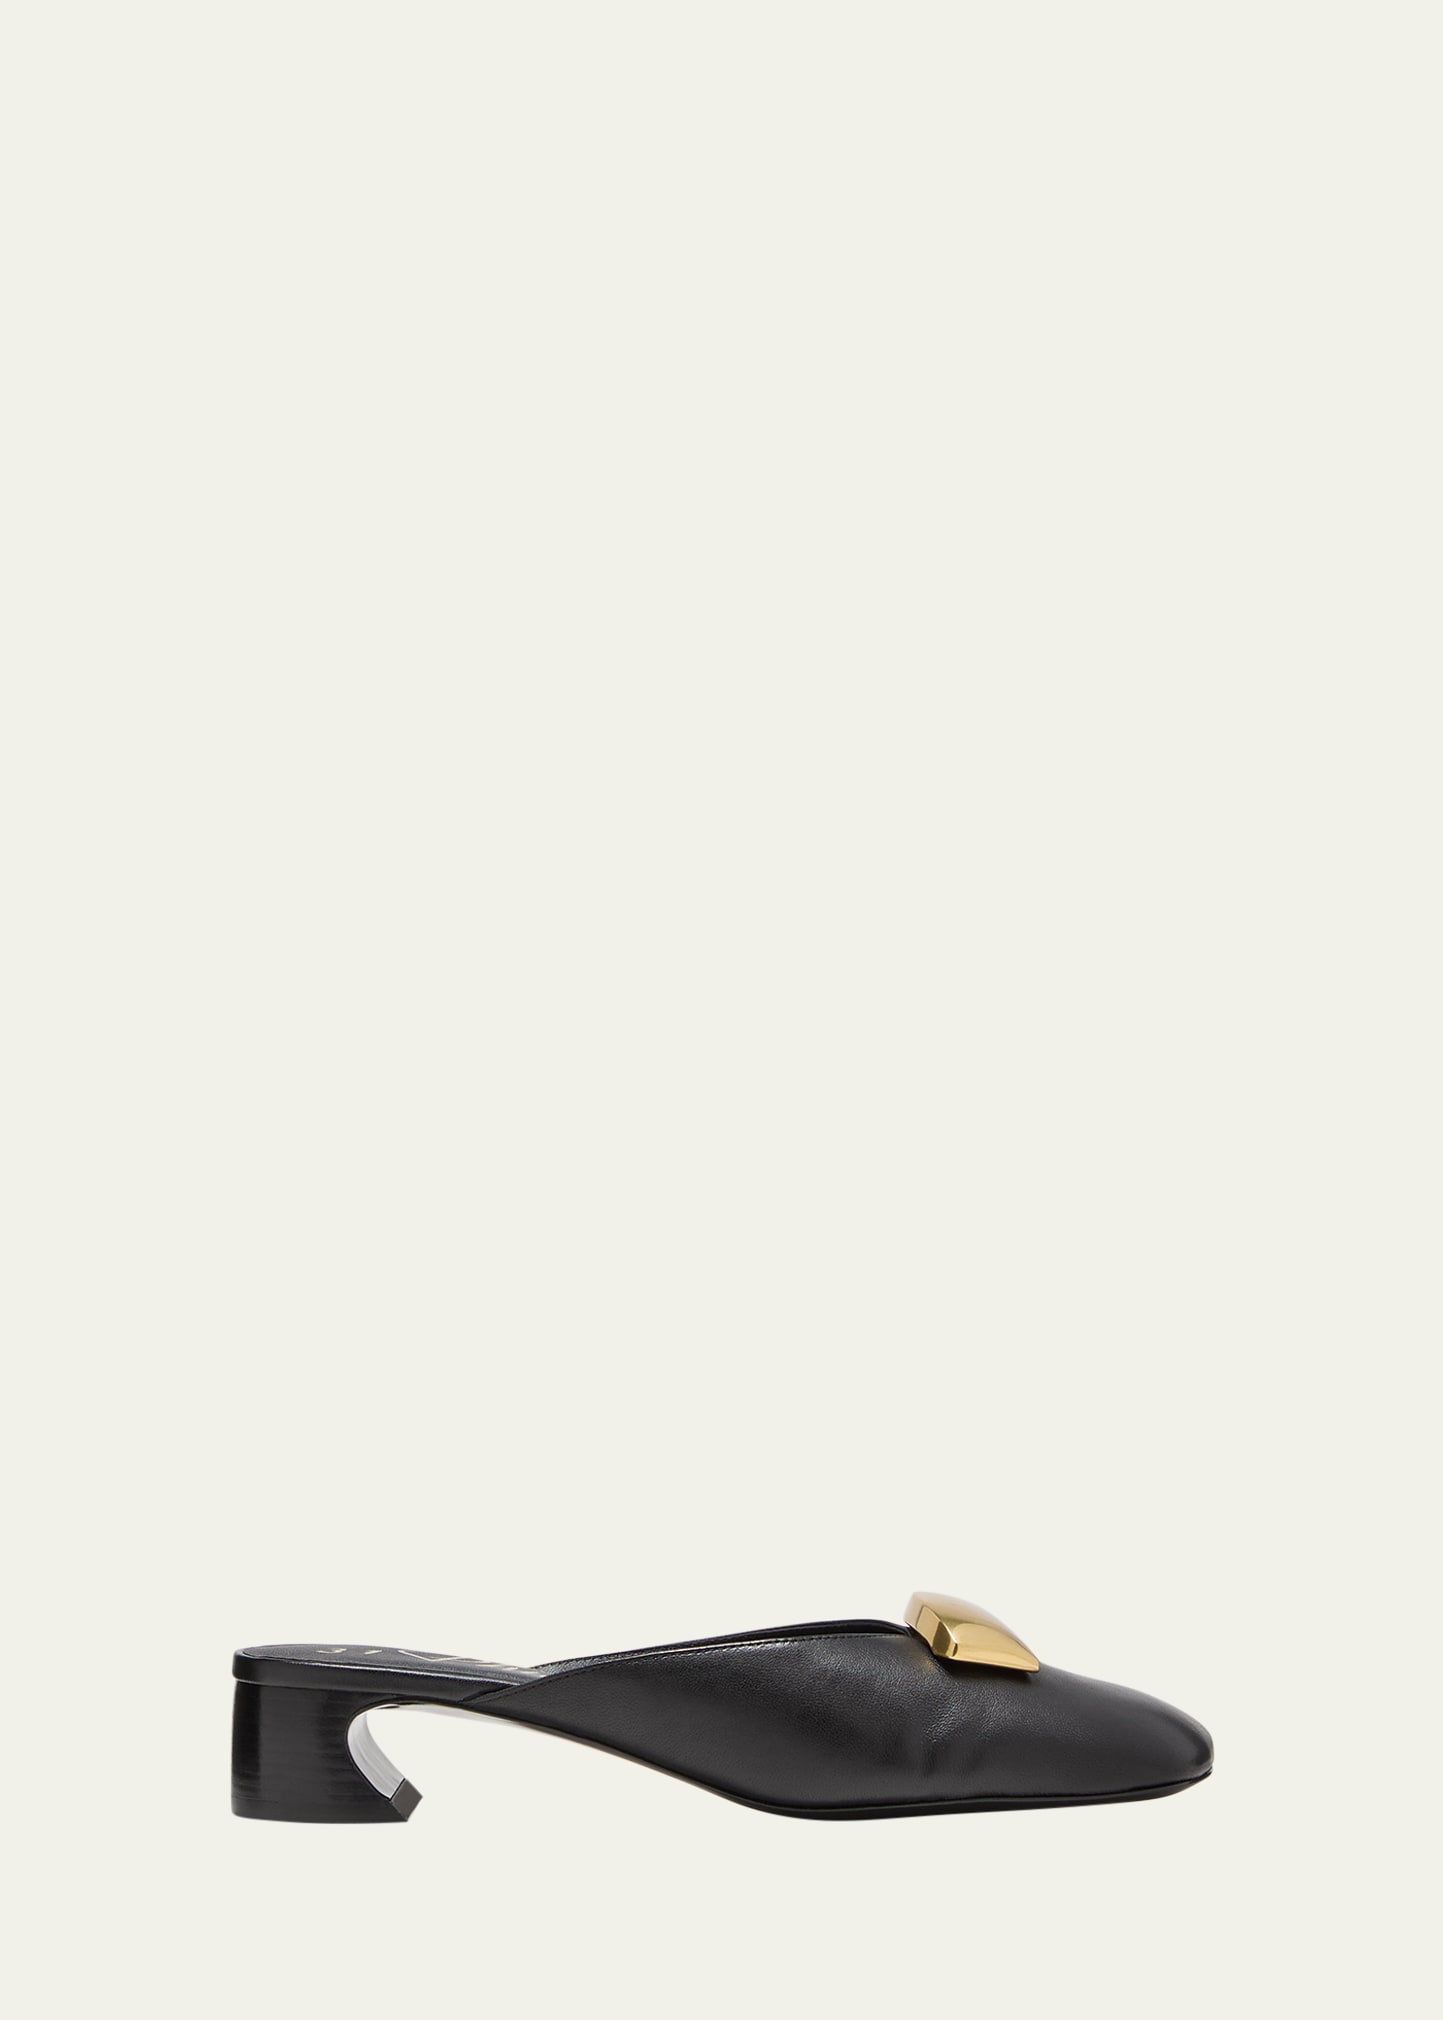 Leather Ornament Comma-Heel Mules